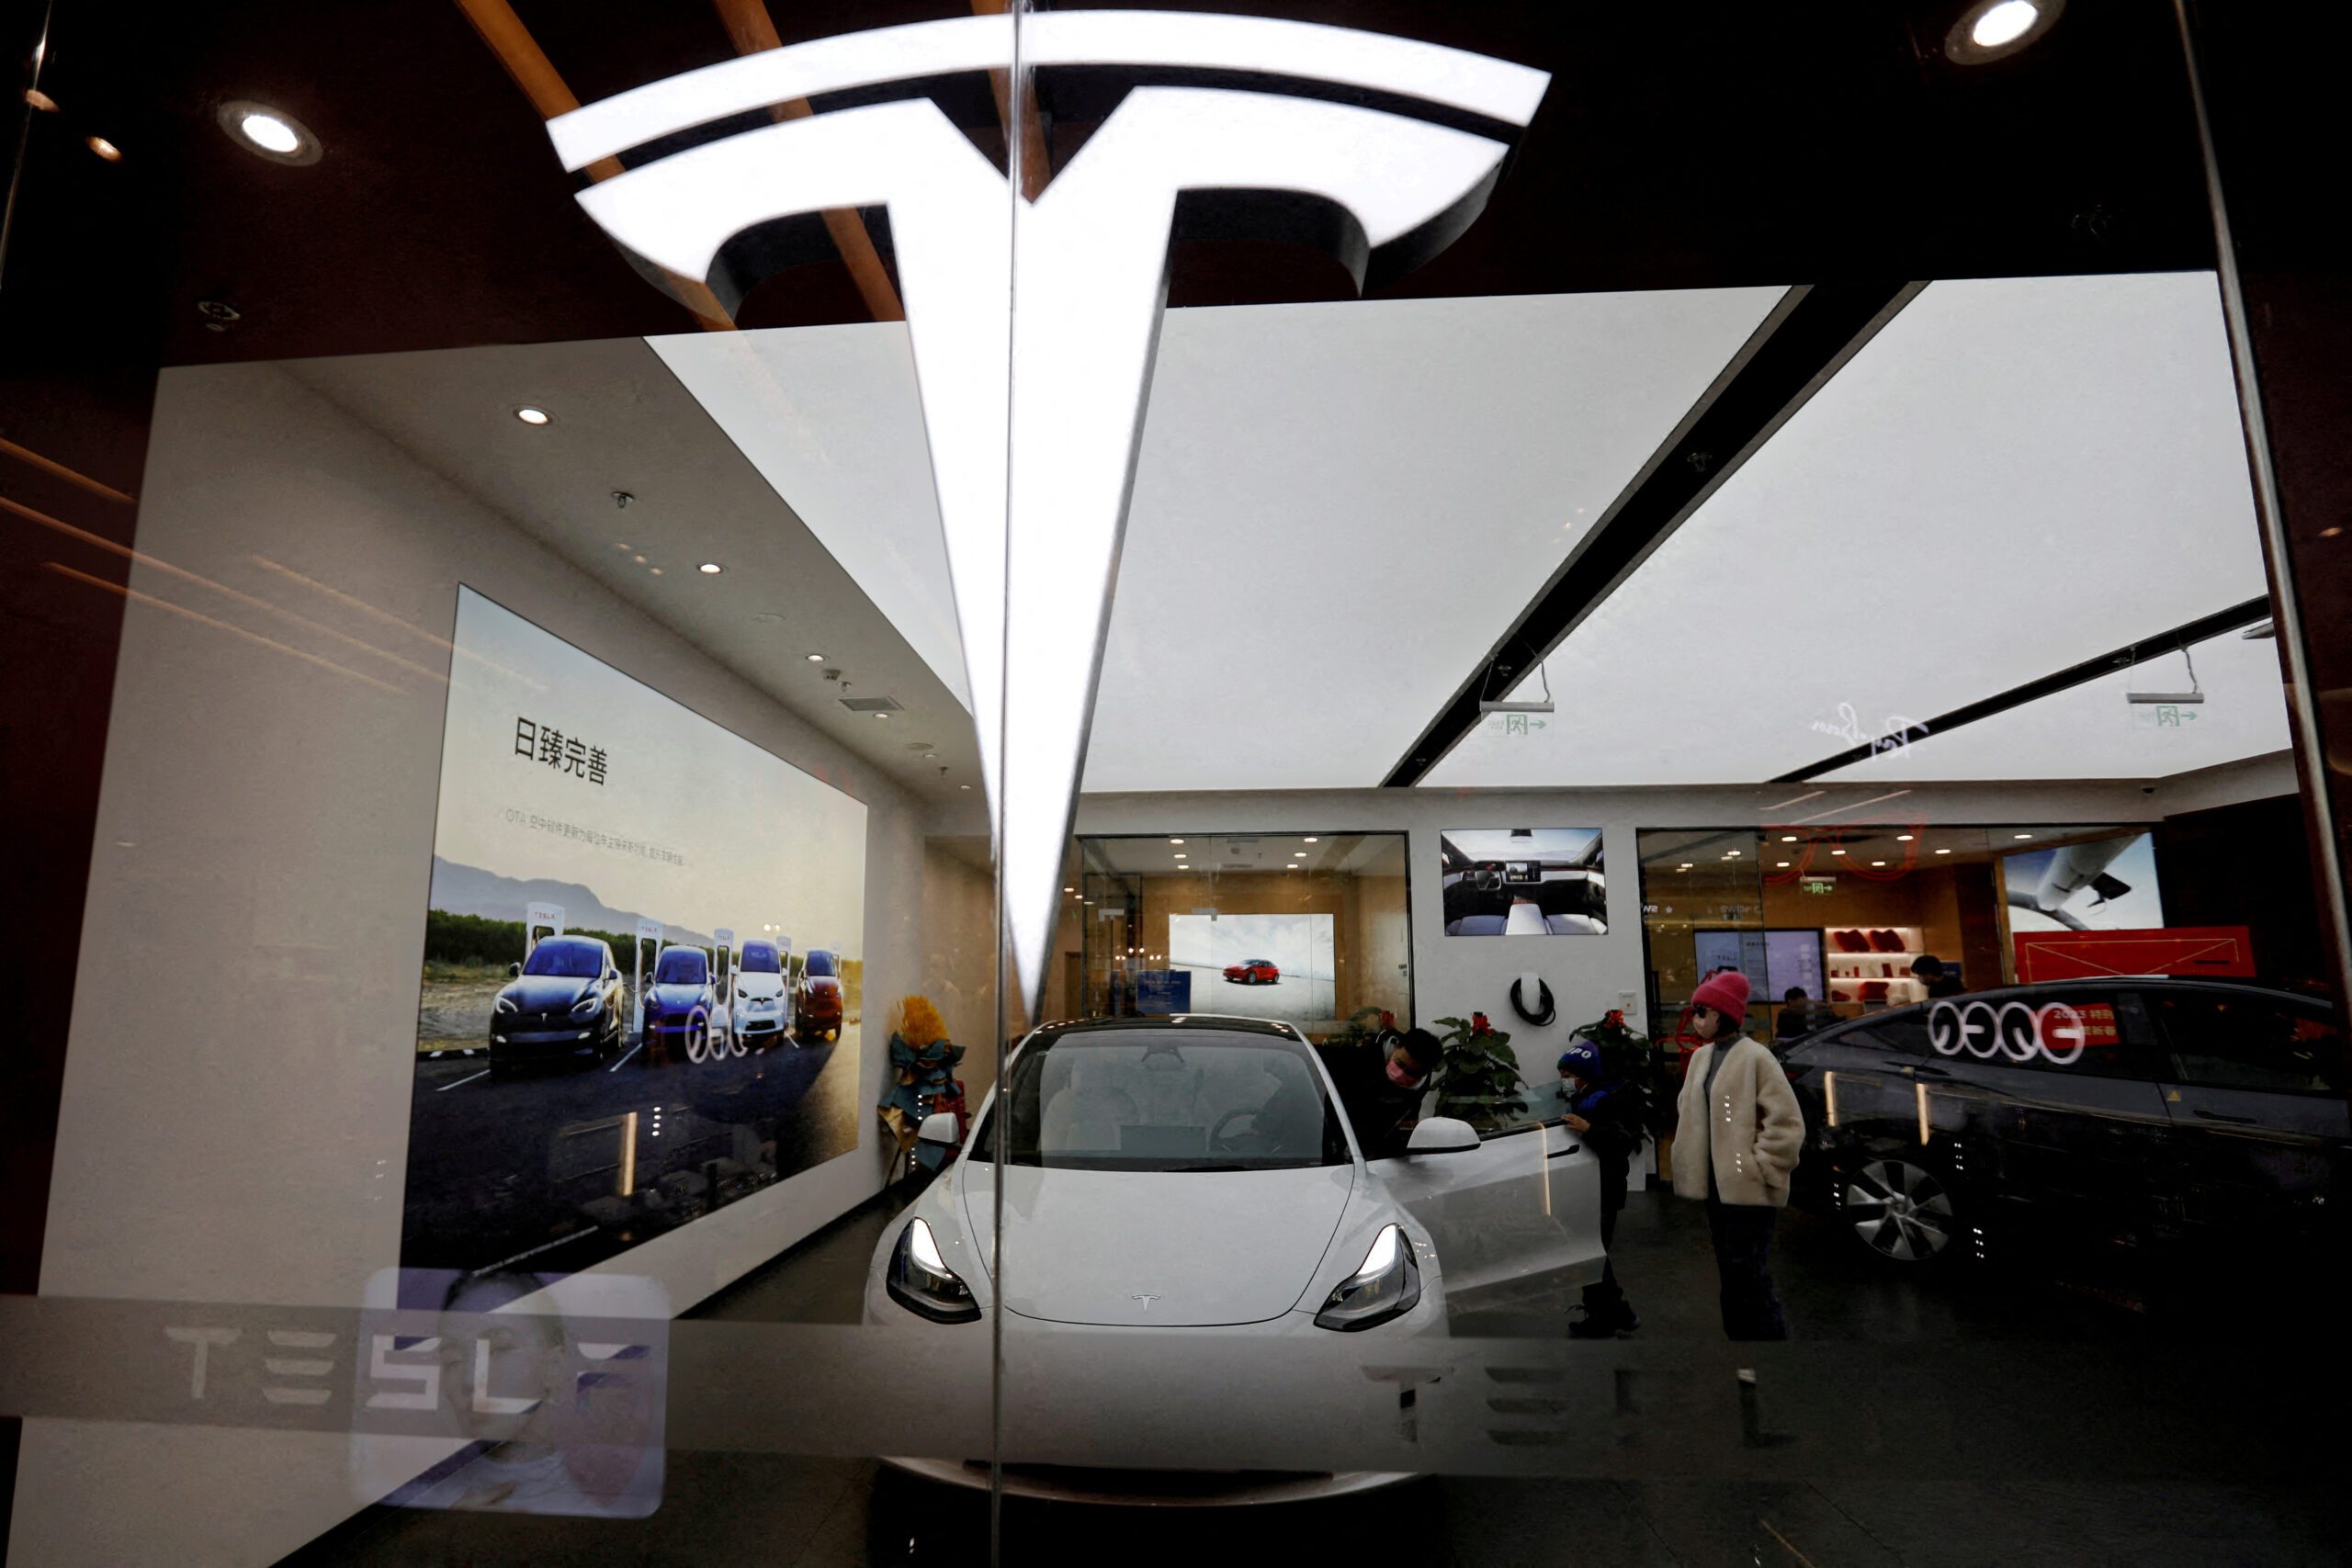 Tesla proposes to launch robotaxis in China